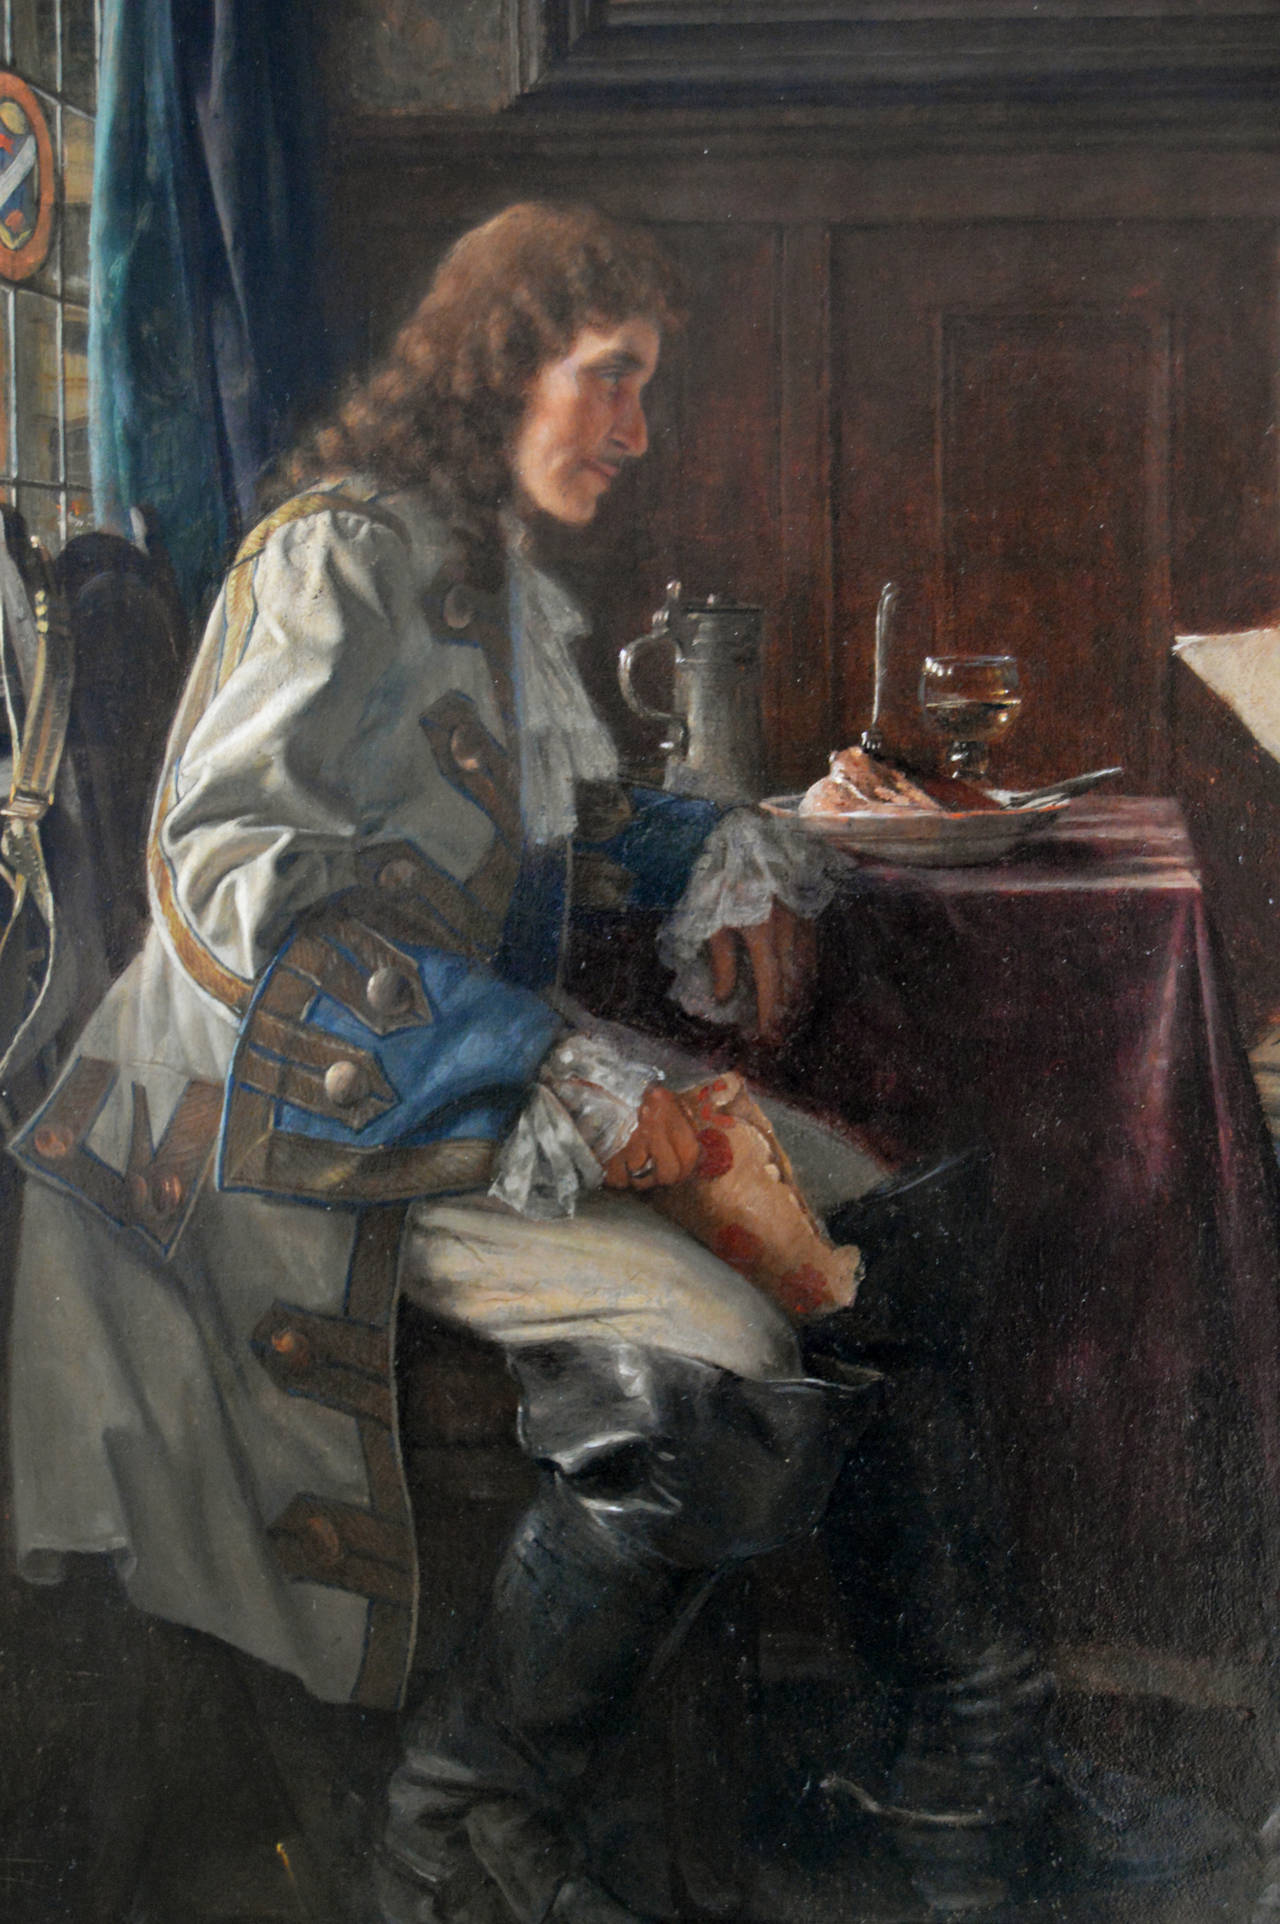 Austrian The Letter, Oil on Canvas by Erwin Eichinger